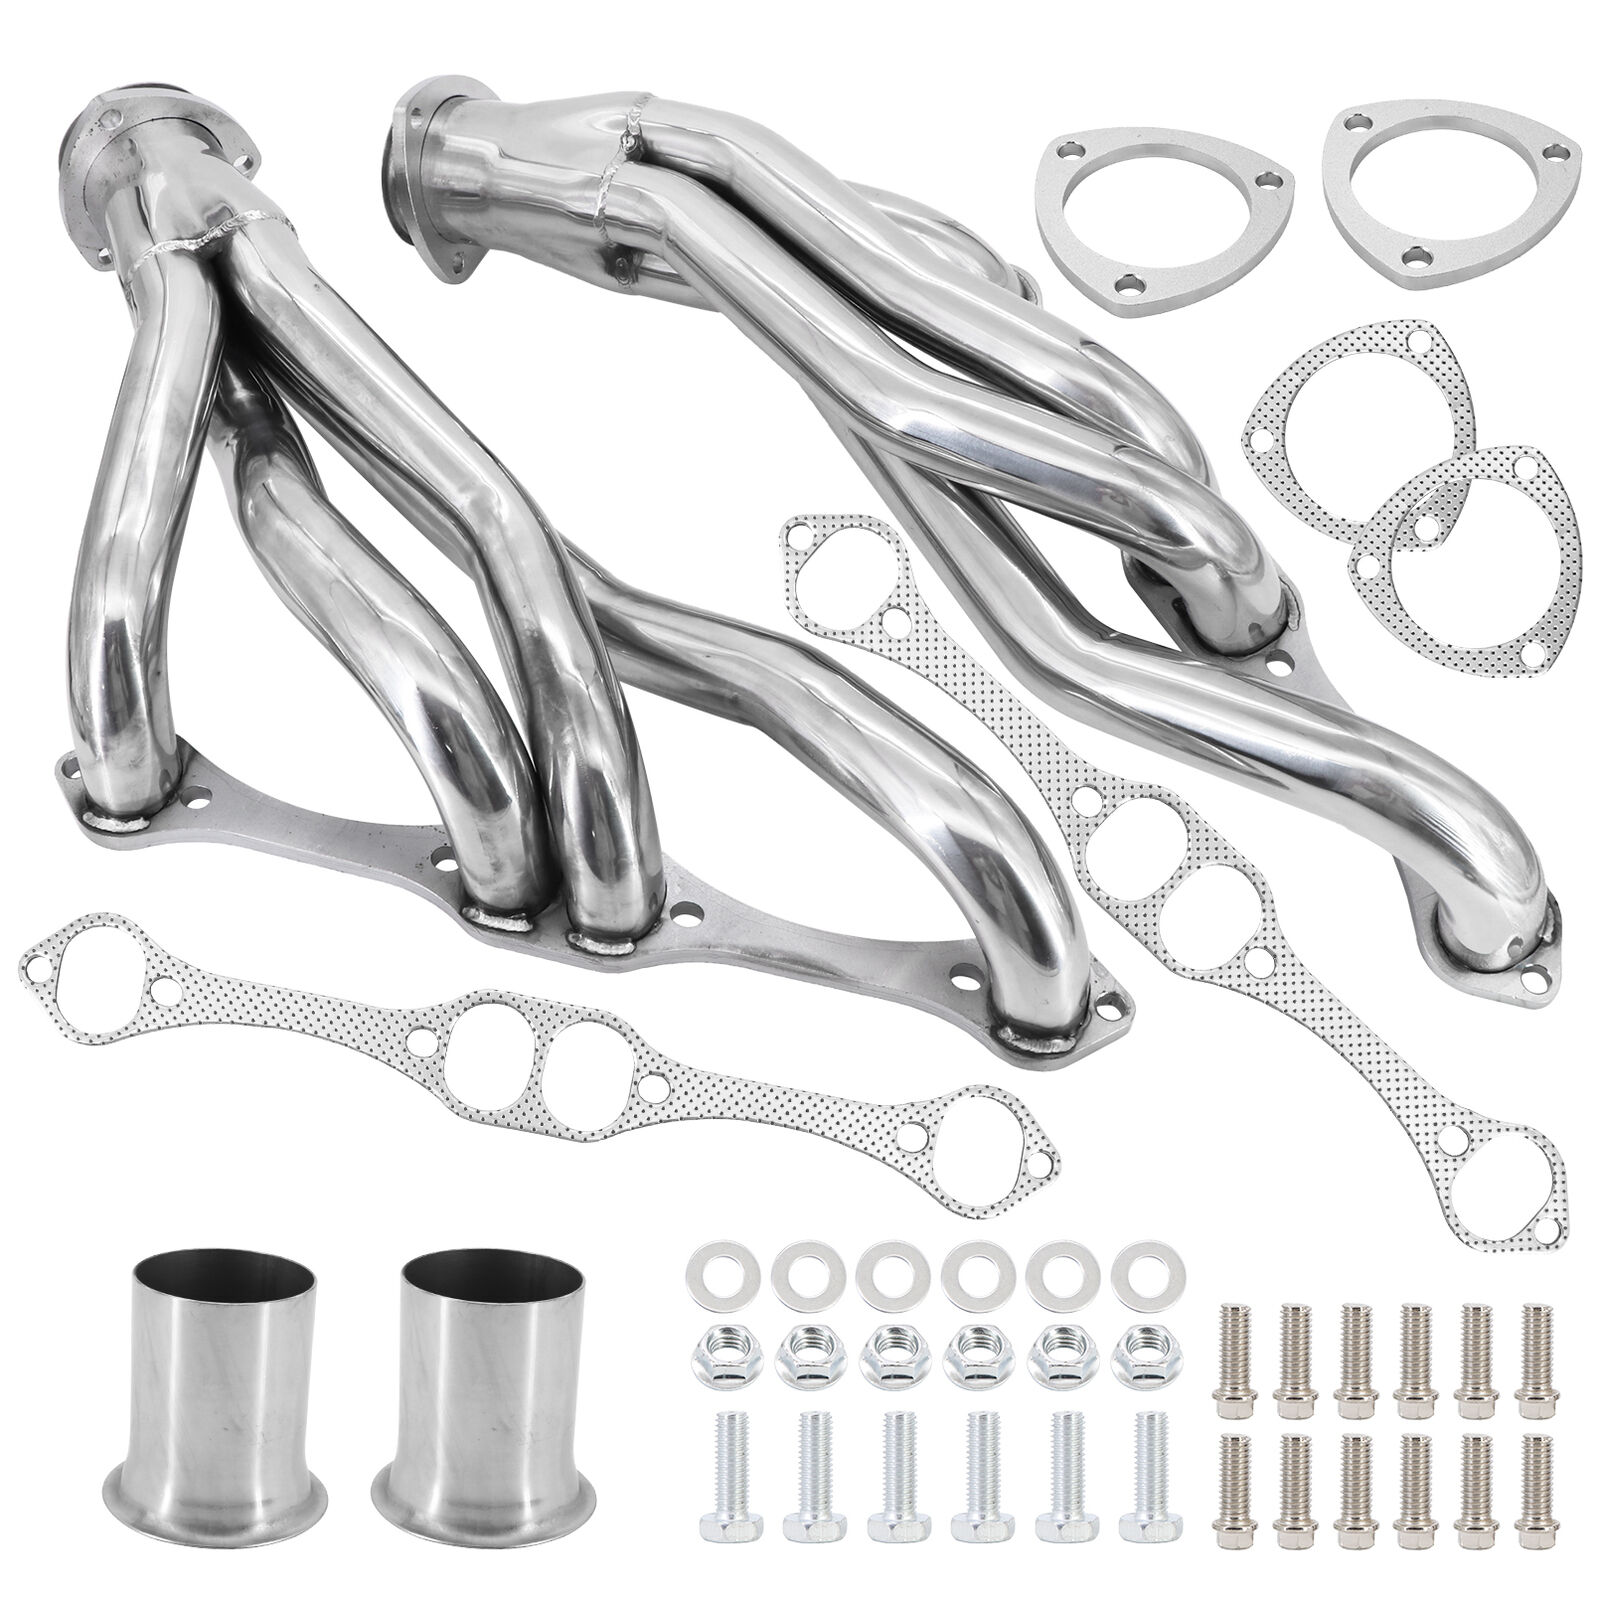 Stainless Shorty Exhaust Manifold Header For Chevy 265-400 V8 Small Block SBC